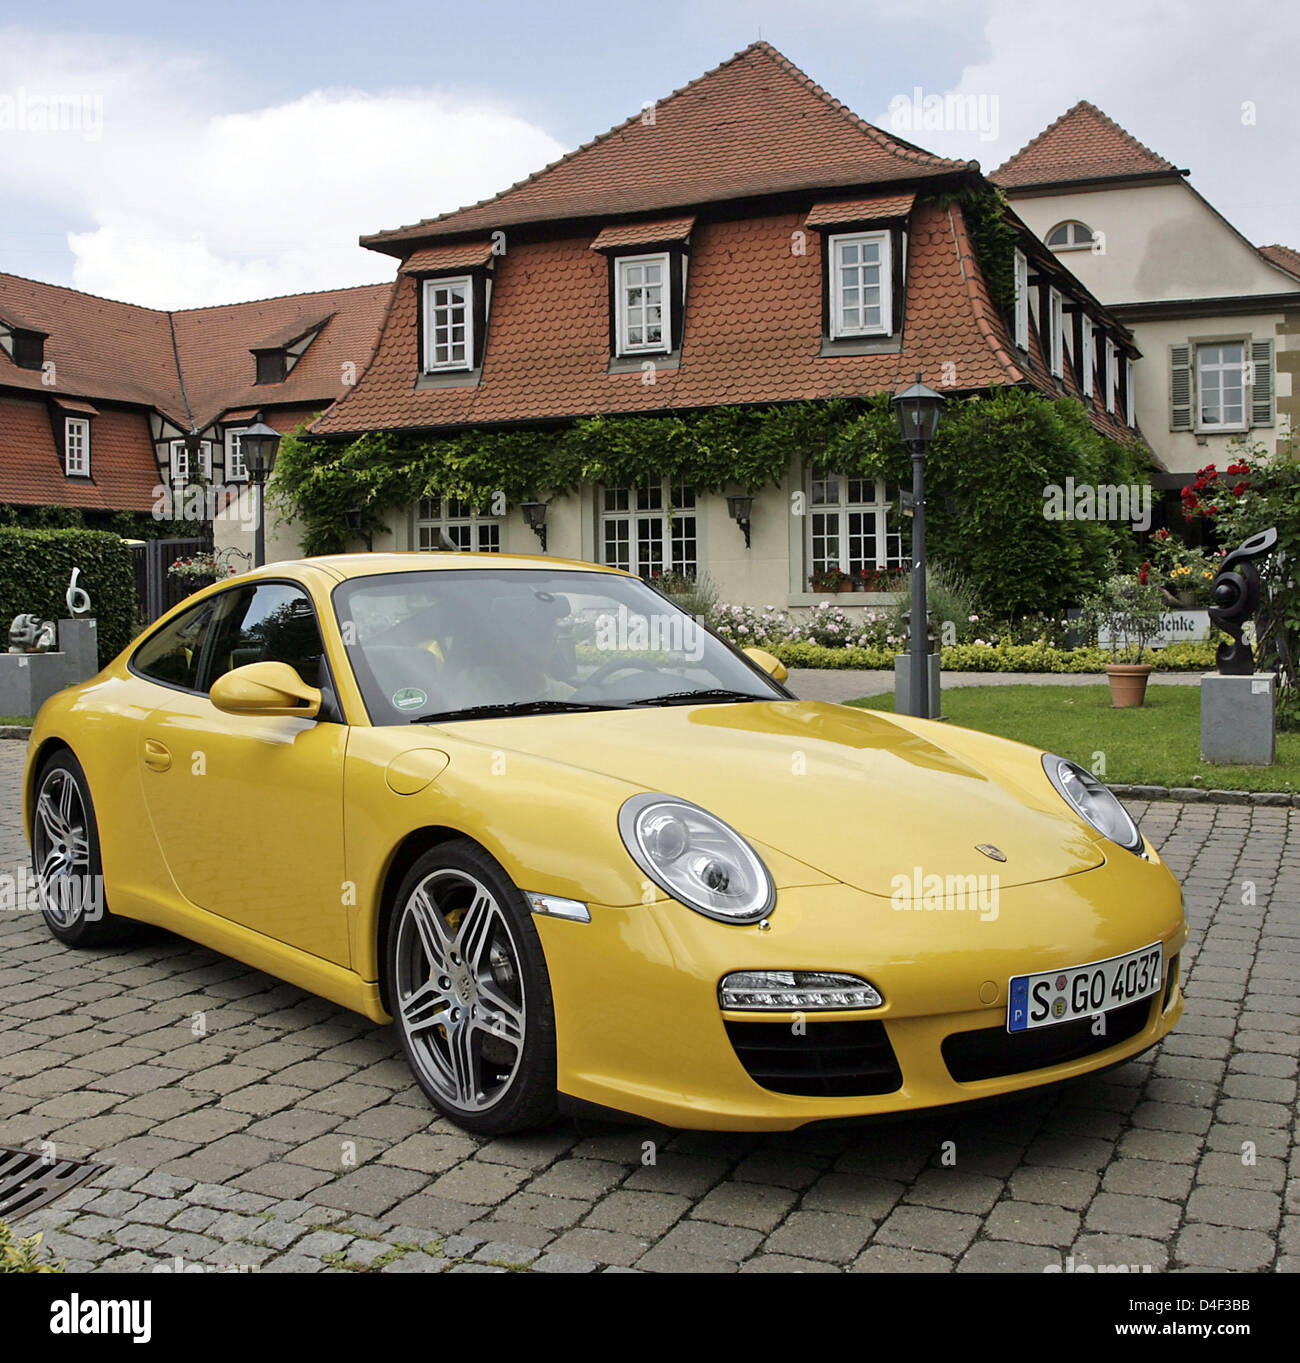 A Porsche 911 Carrera S Coupe seen in front of Restaurant Gutsschenke in Ludwigsburg, Germany, 9 June 2008. Porsche presented its new 911 series, which is equipped with completely new engines. Photo: MARIJAN MURAT Stock Photo